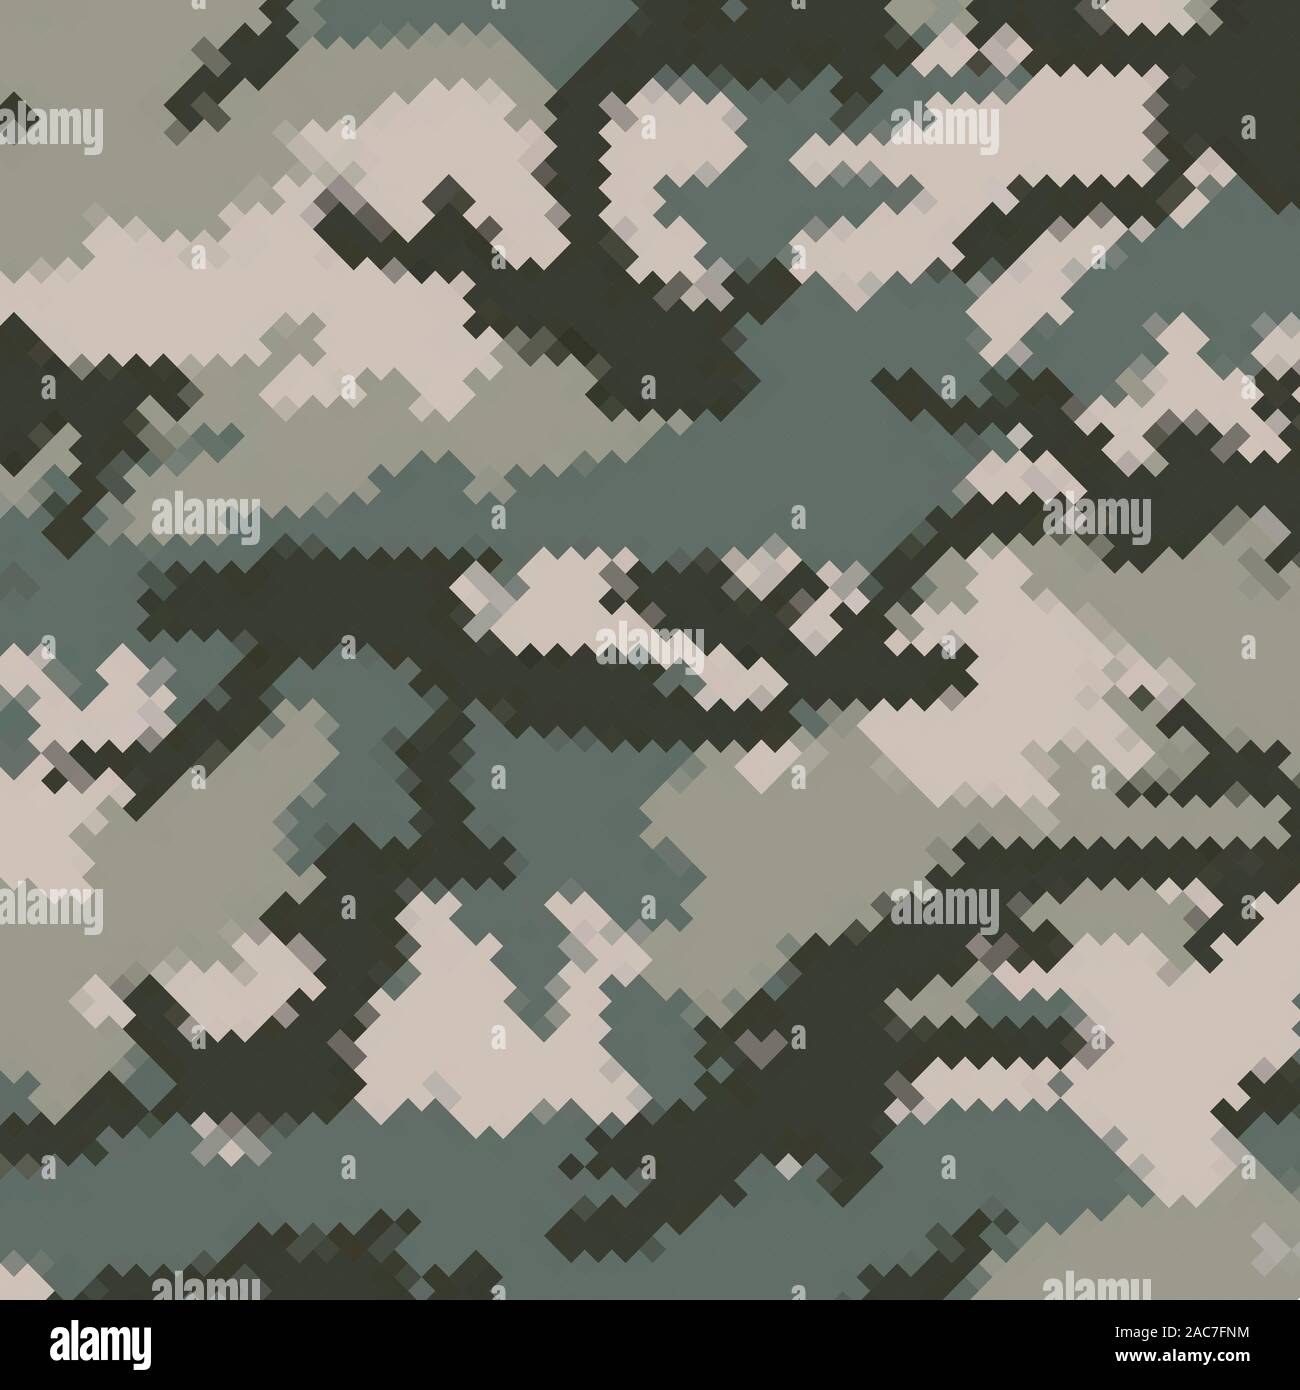 Urban Camouflage Background. Army Military Pattern. Green Pixel Fabric ...